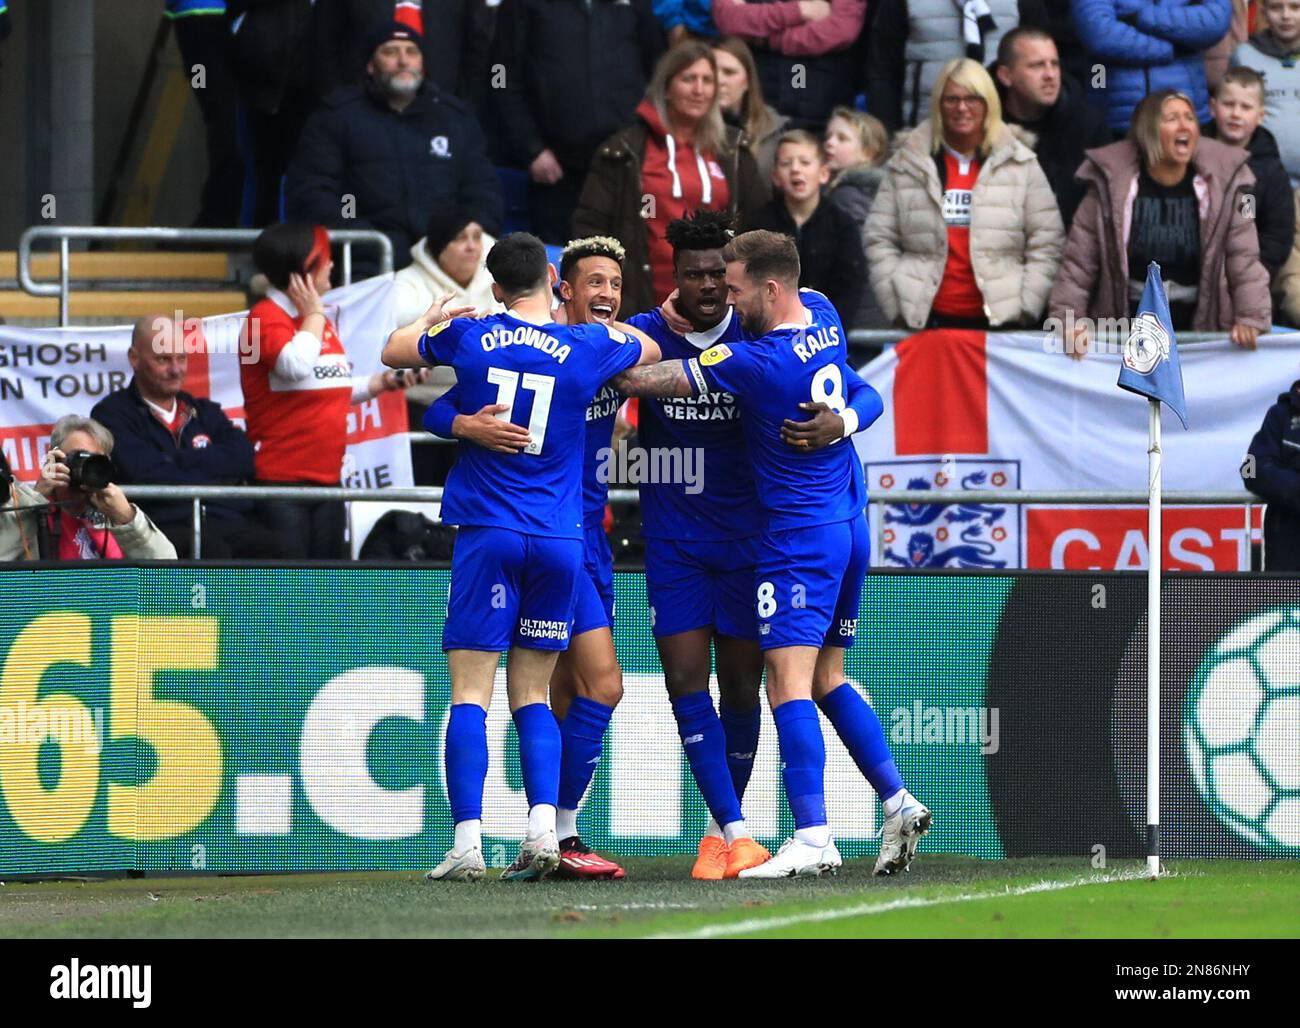 Cardiff City 1-1 Stoke City: Sory Kaba scores and misses penalty